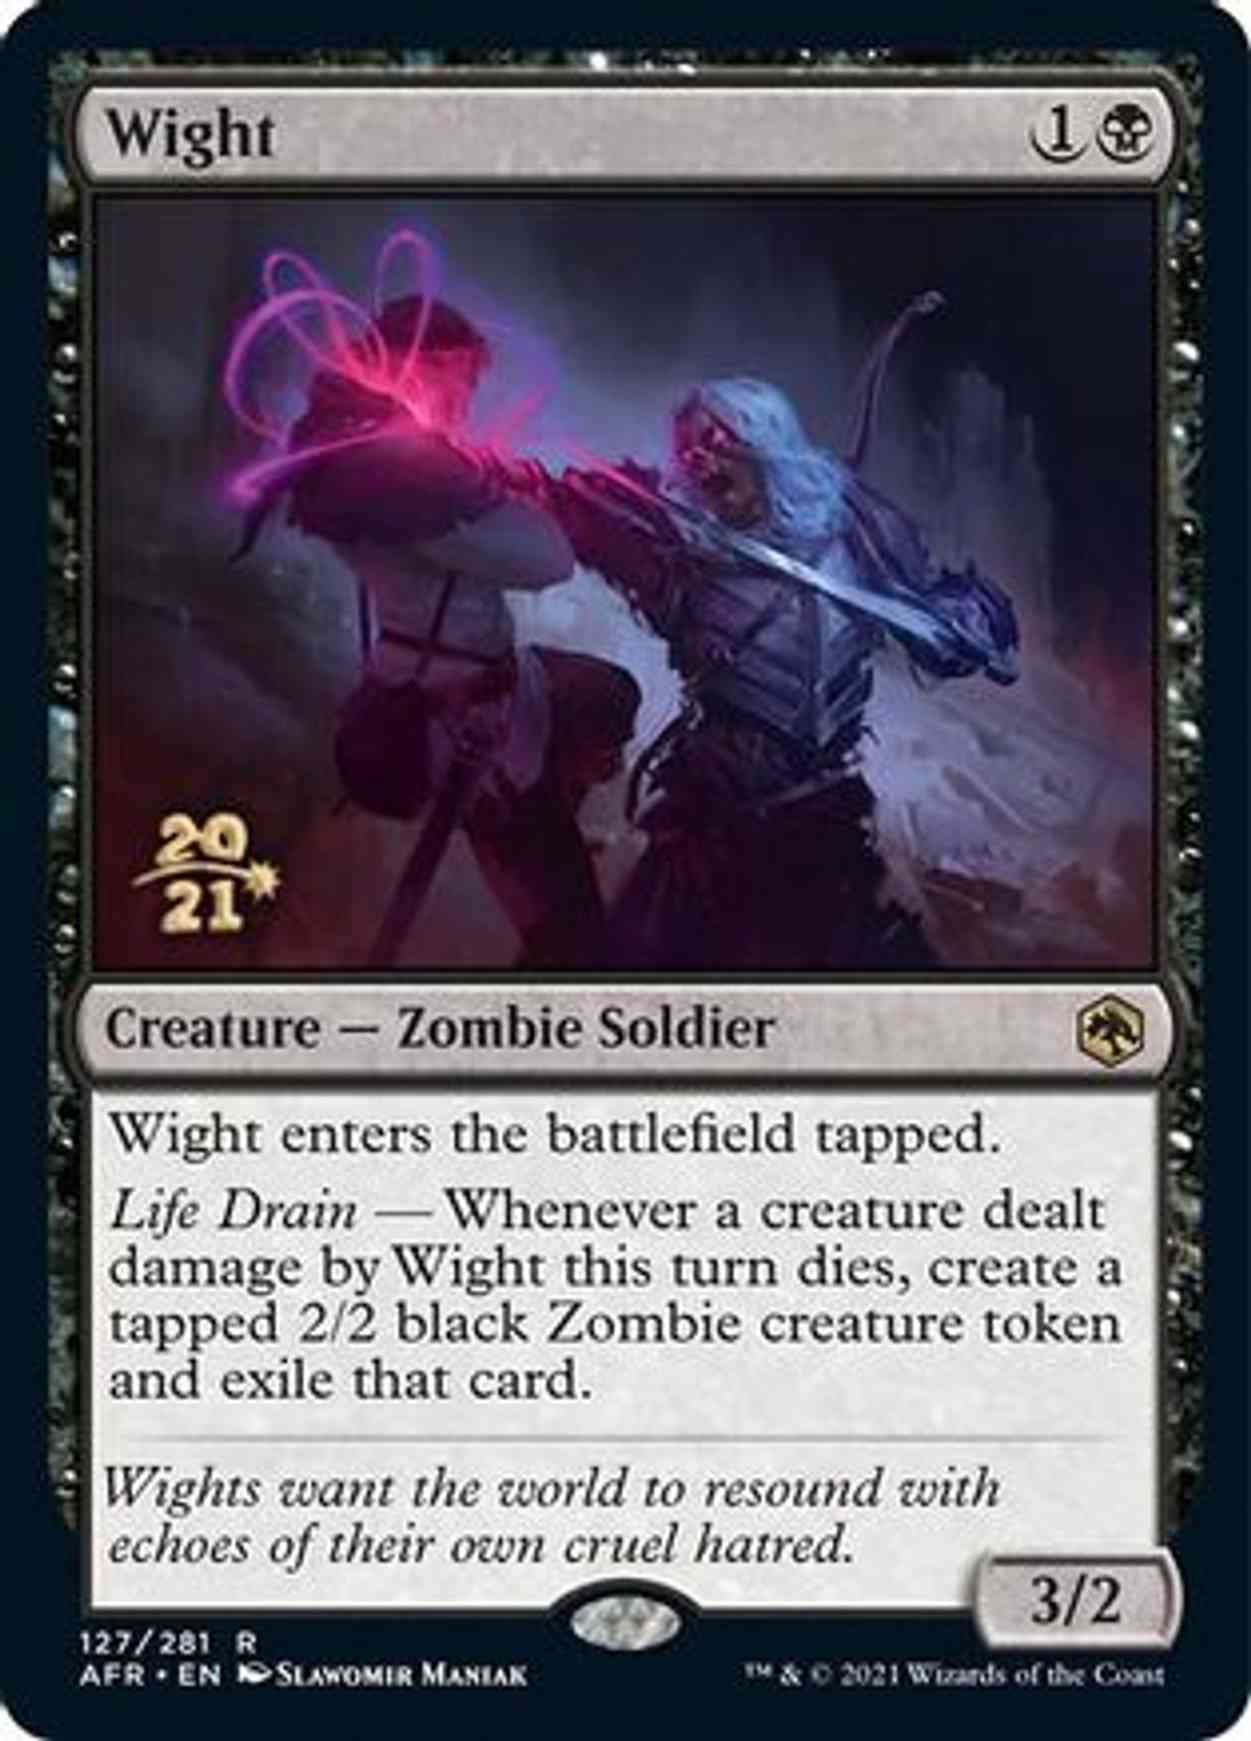 Wight magic card front